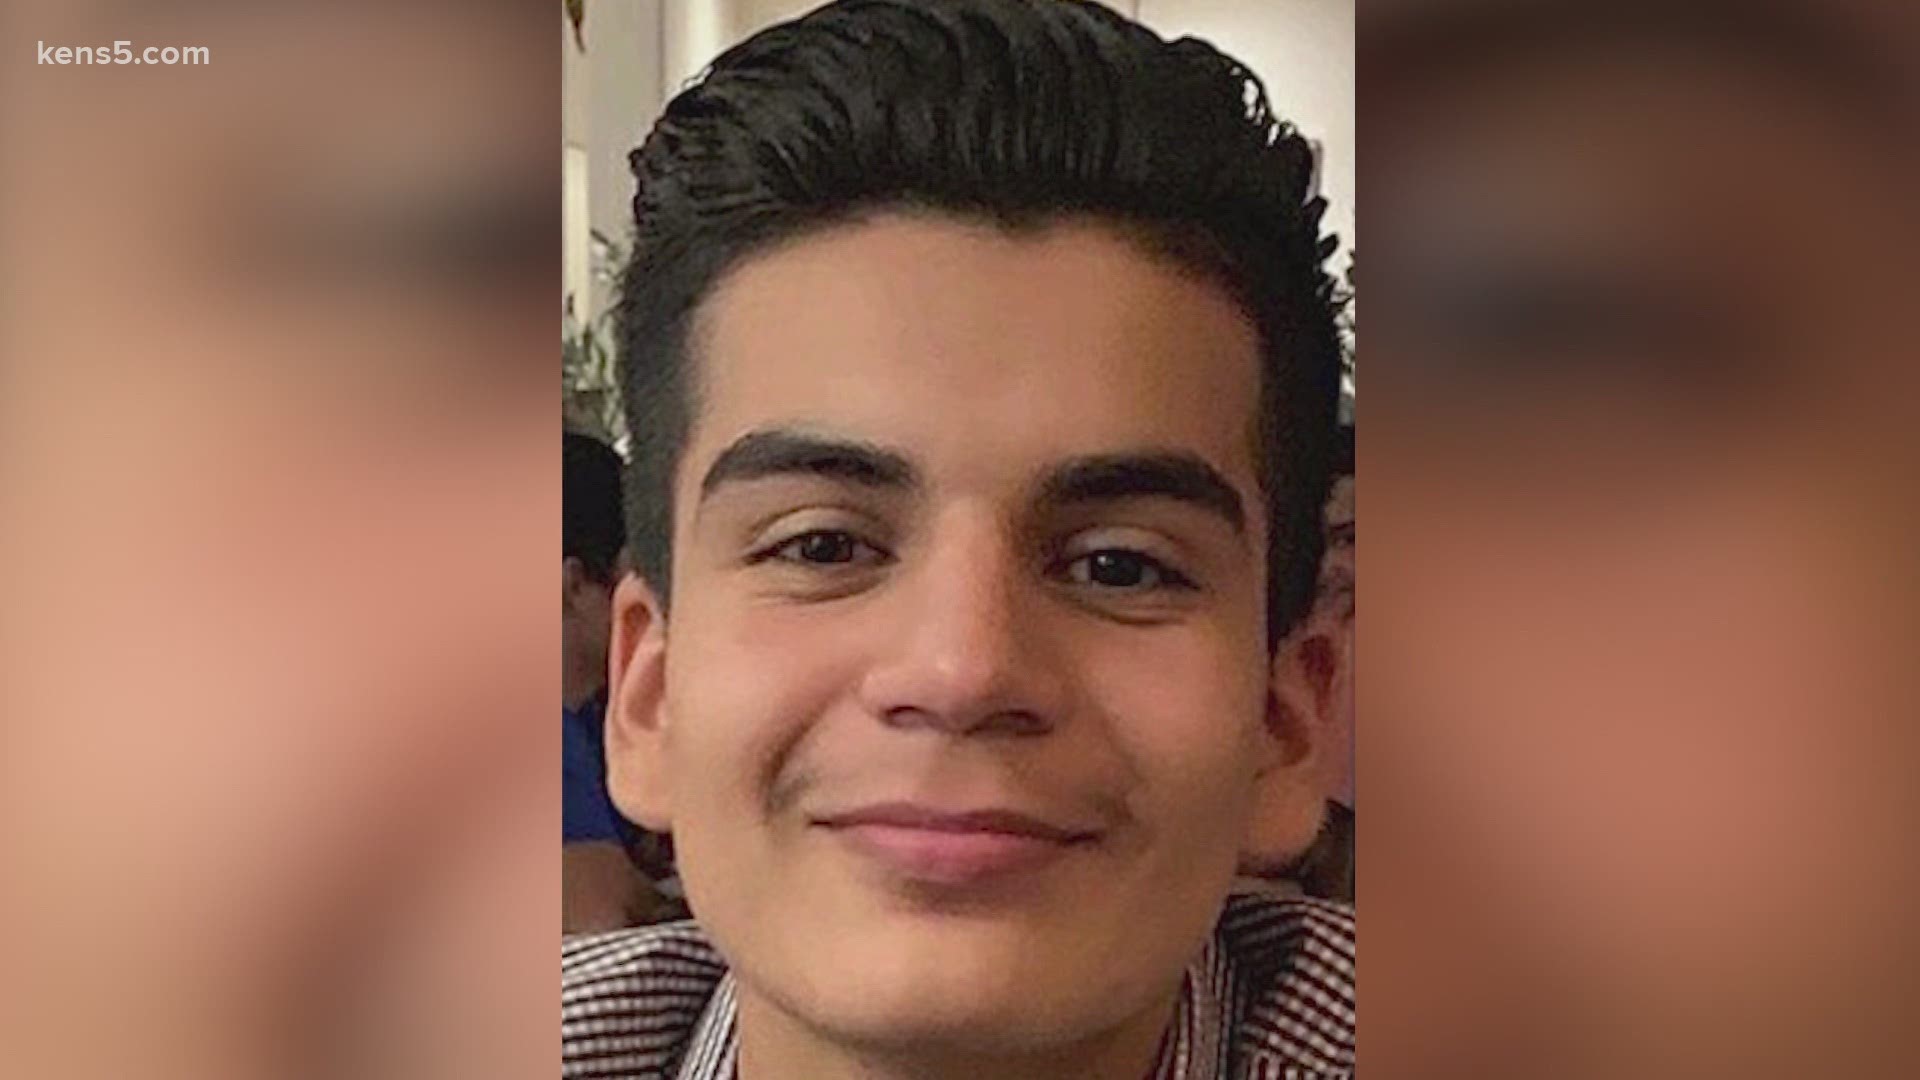 Police say 17-year-old Sebastian Vazquez Carpio was last seen on the west side of San Antonio, and has been missing since Friday.